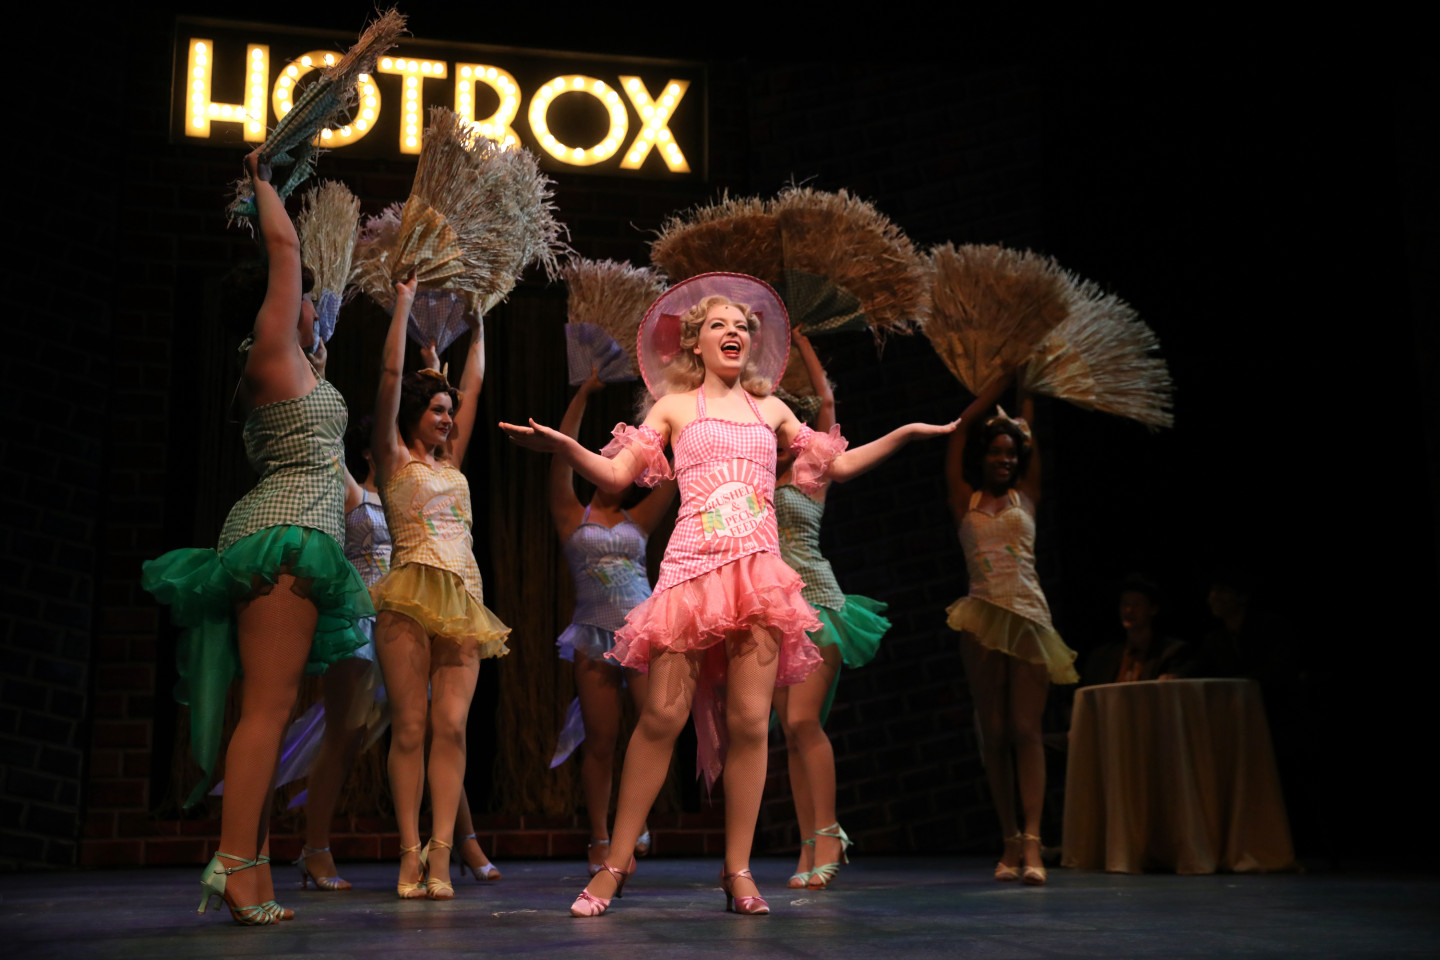 An actress in a pink dress dances at the Hotbox Club on stage in "Guys and Dolls."